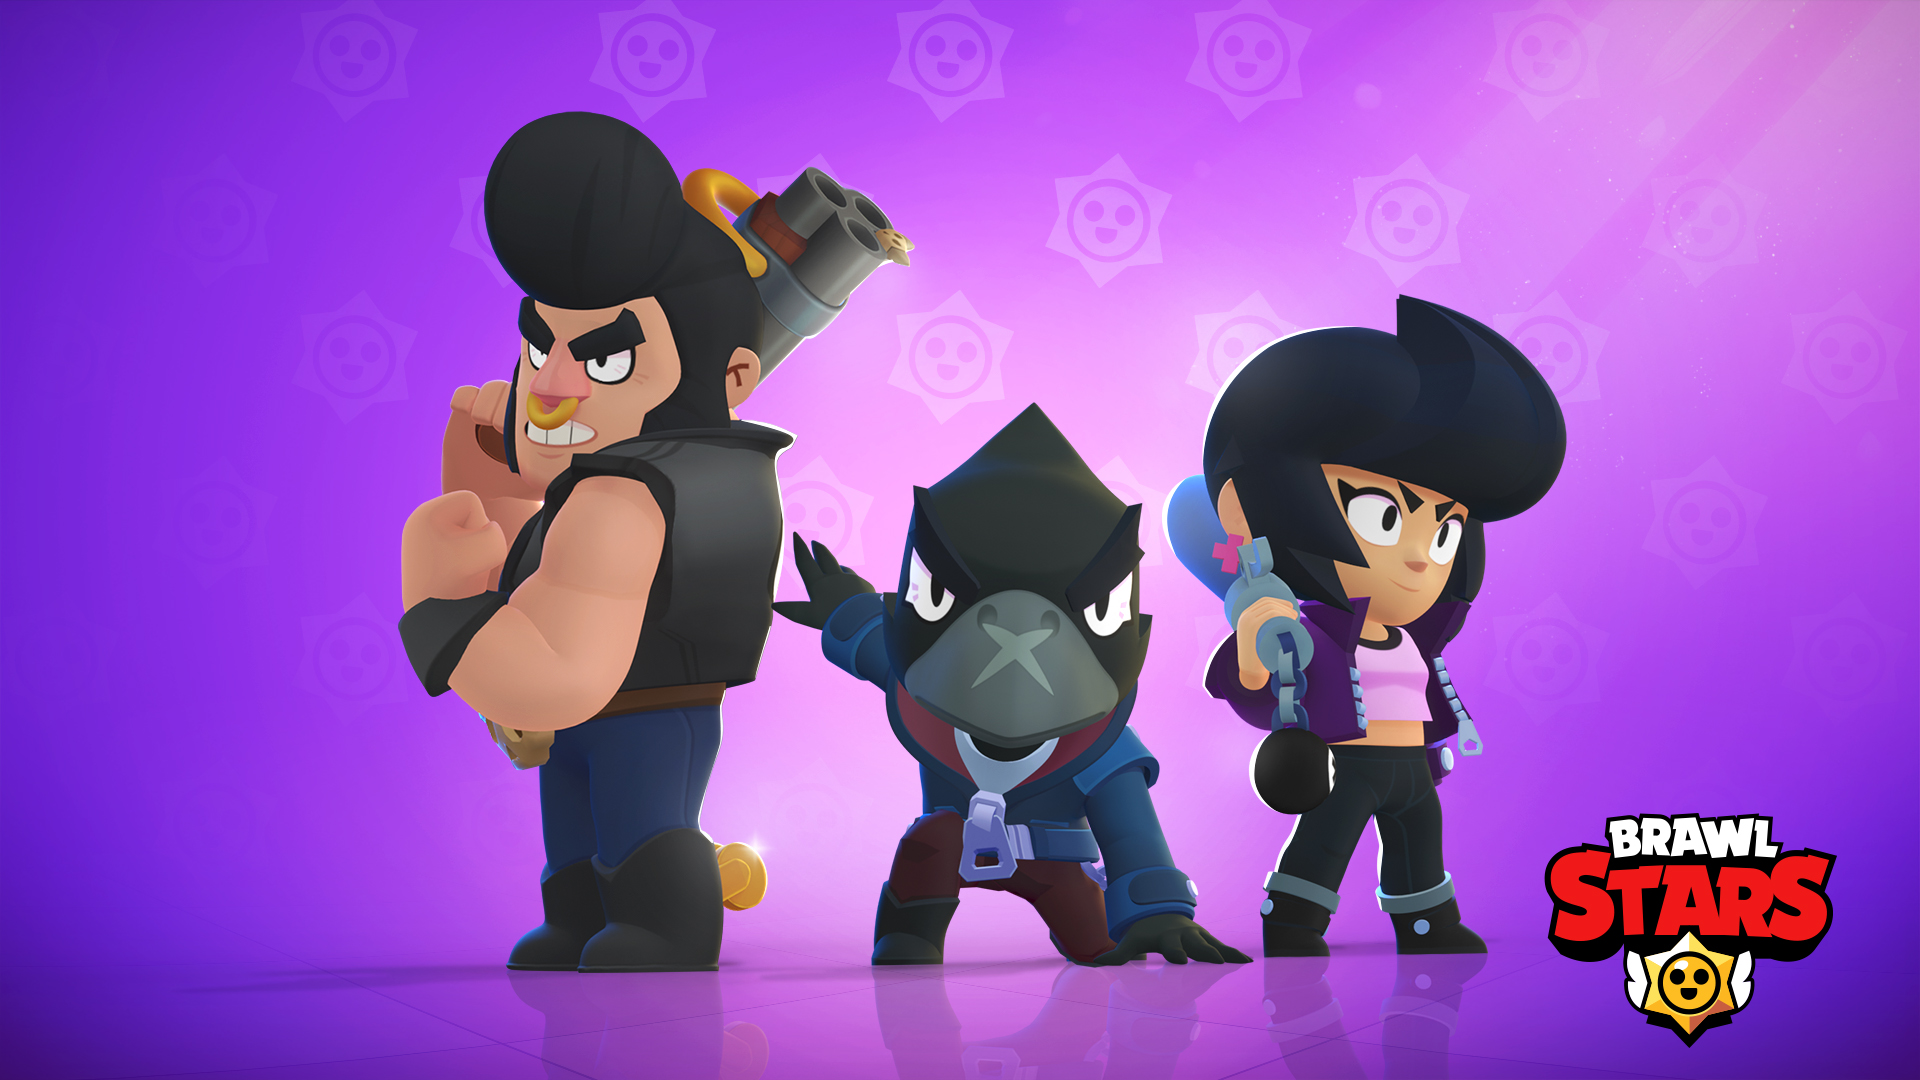 Brawl Stars Sur Twitter We Know Playing With Randoms Can Be Tough Sometimes So How About Trying Something Different Today Comment Below 1 Your Total Trophies 2 - comment envoyer une demande d'ami sur brawl stars